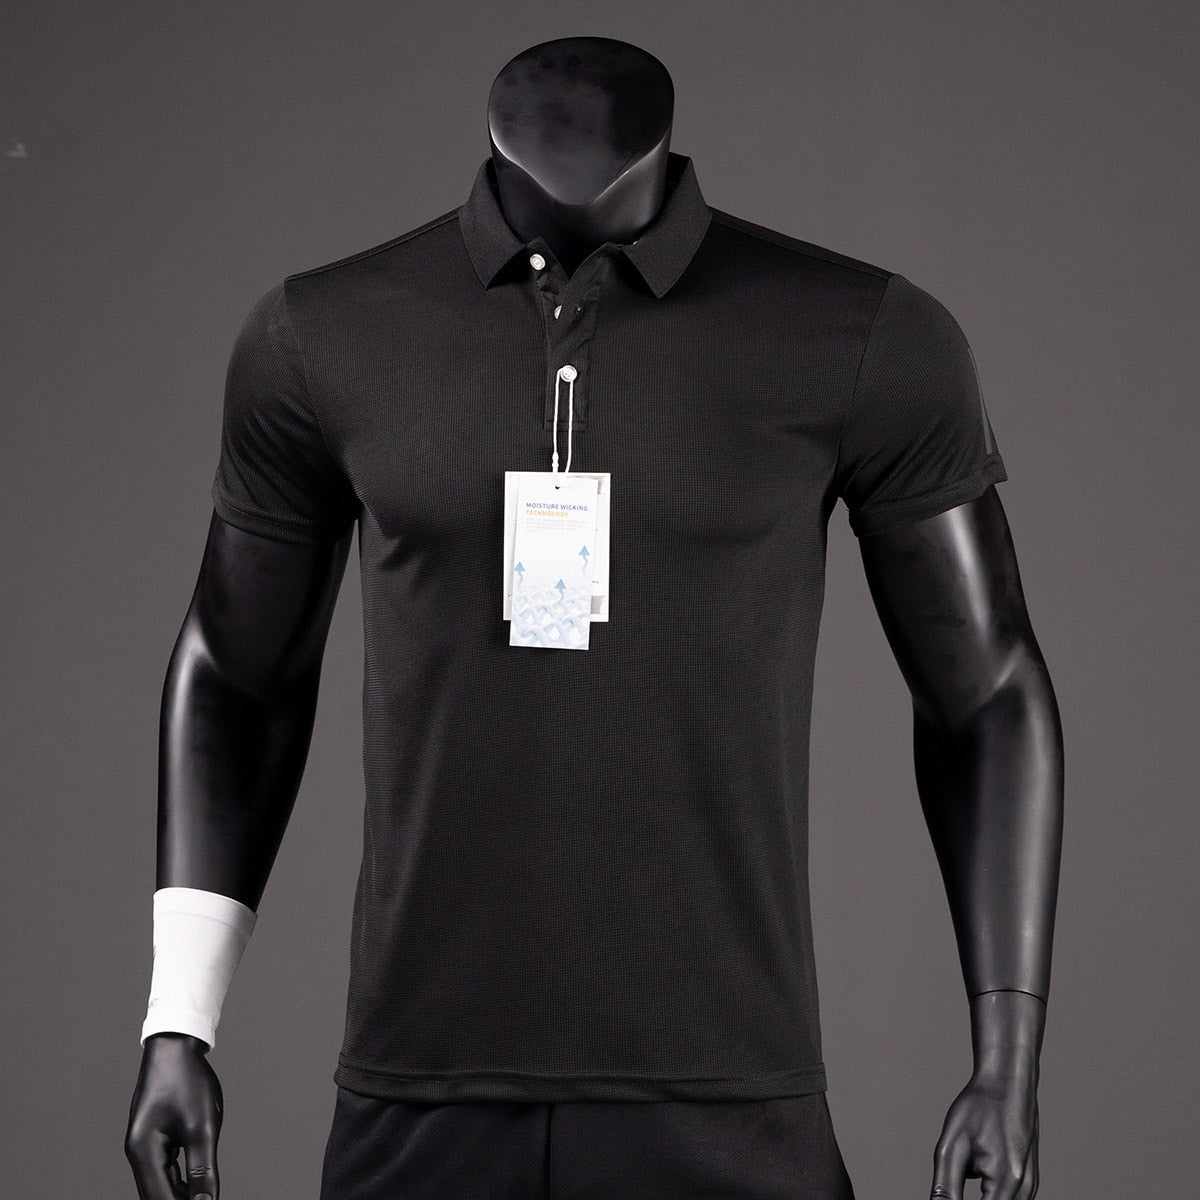 Men's Luxury Quick-Drying Golf Polo Shirt - Breathable Lapel Short-Sleeved Tee for Summer